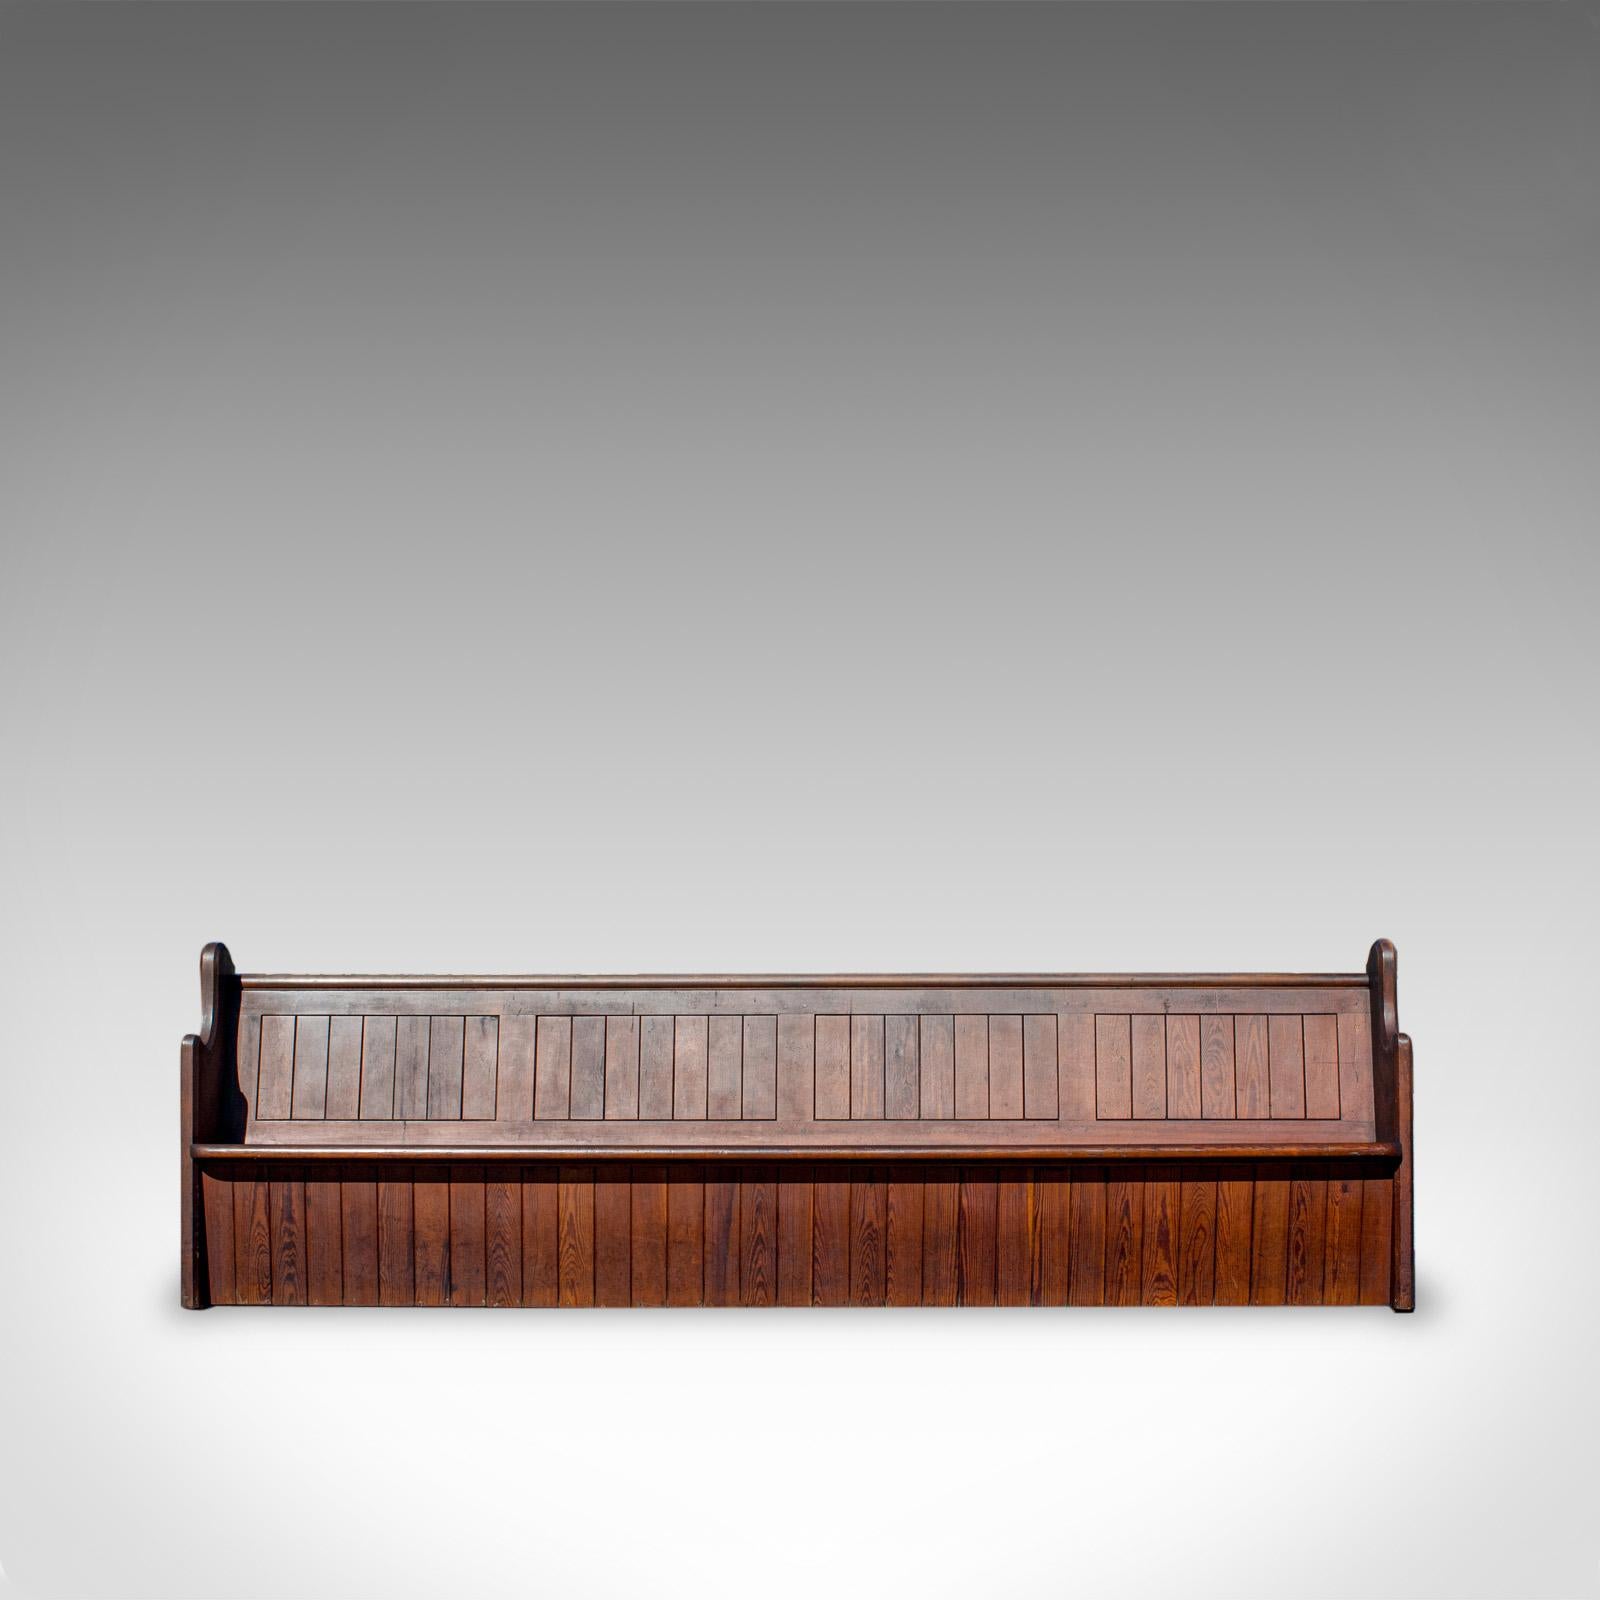 This is a large (10') antique pew. An English, pitch pine bench seat for 7-8 people and dating to the Victorian period, circa 1880.

Generous proportion at 10ft wide, seating 7-8 people
Displays a fine grain interest and desirable aged